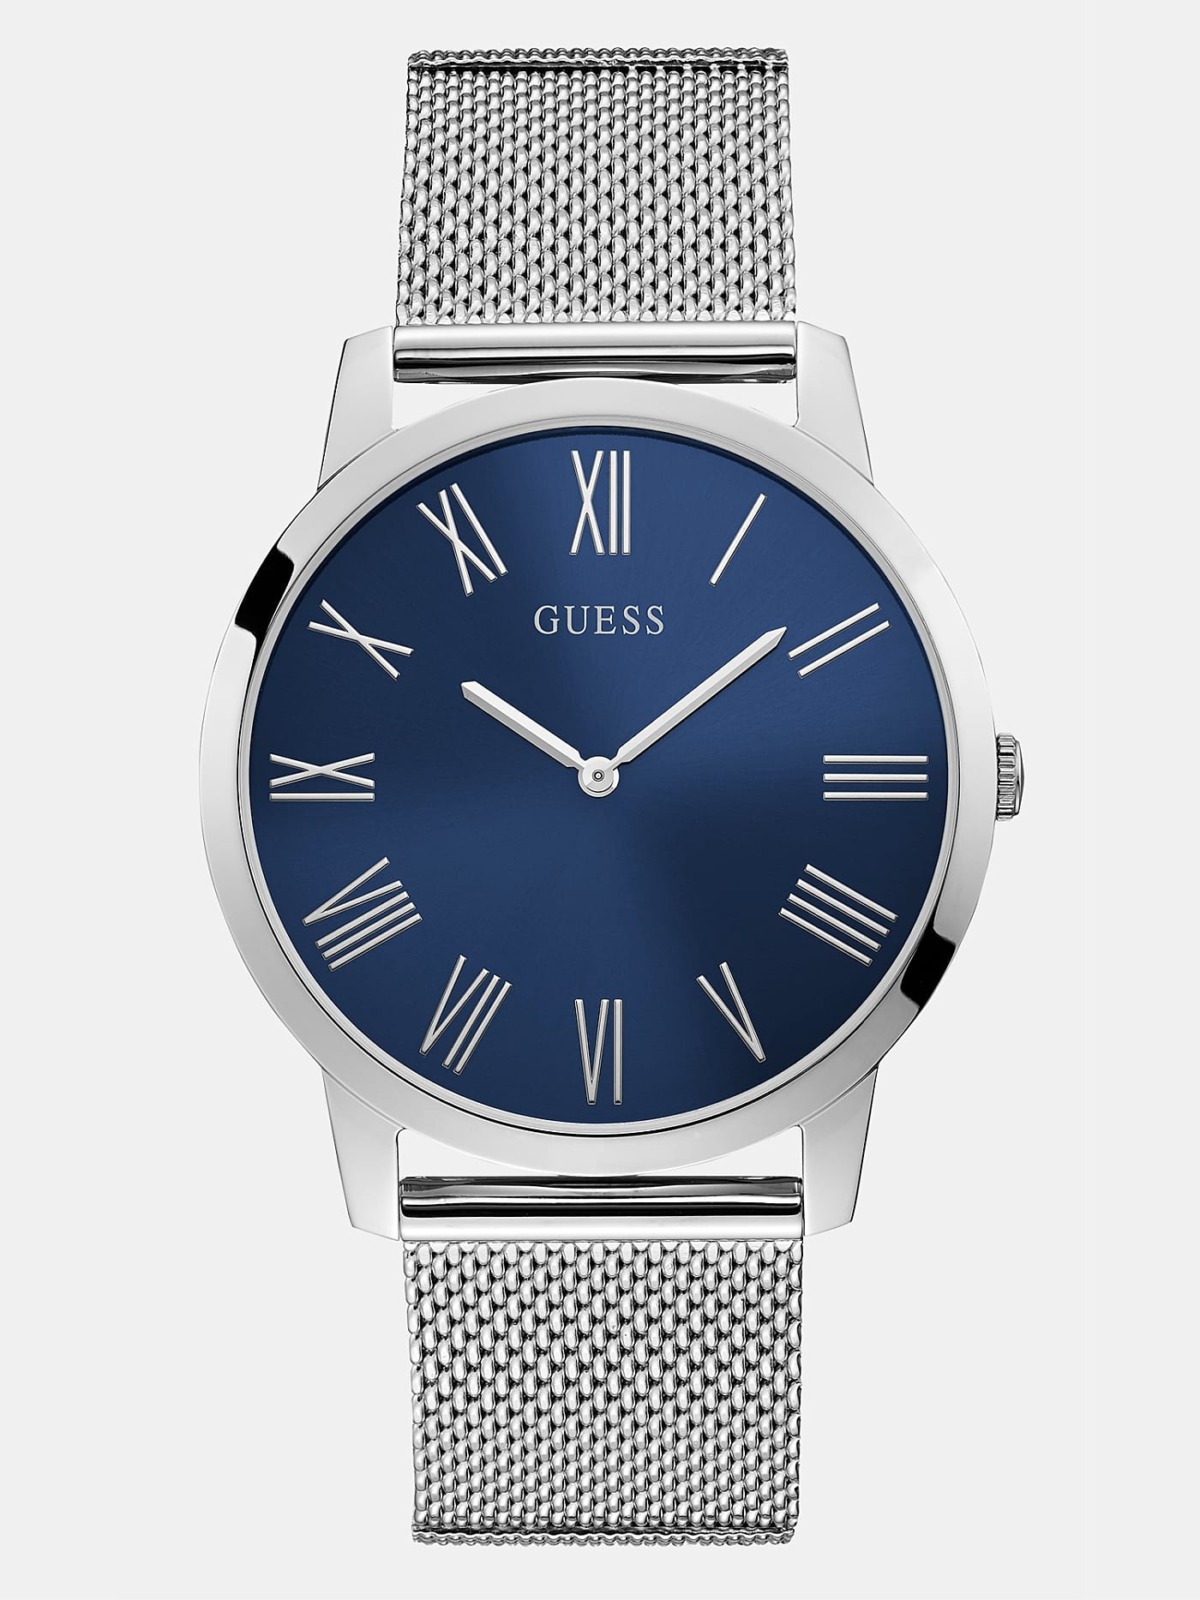 Gent Silver Watch at Guess GOOFASH